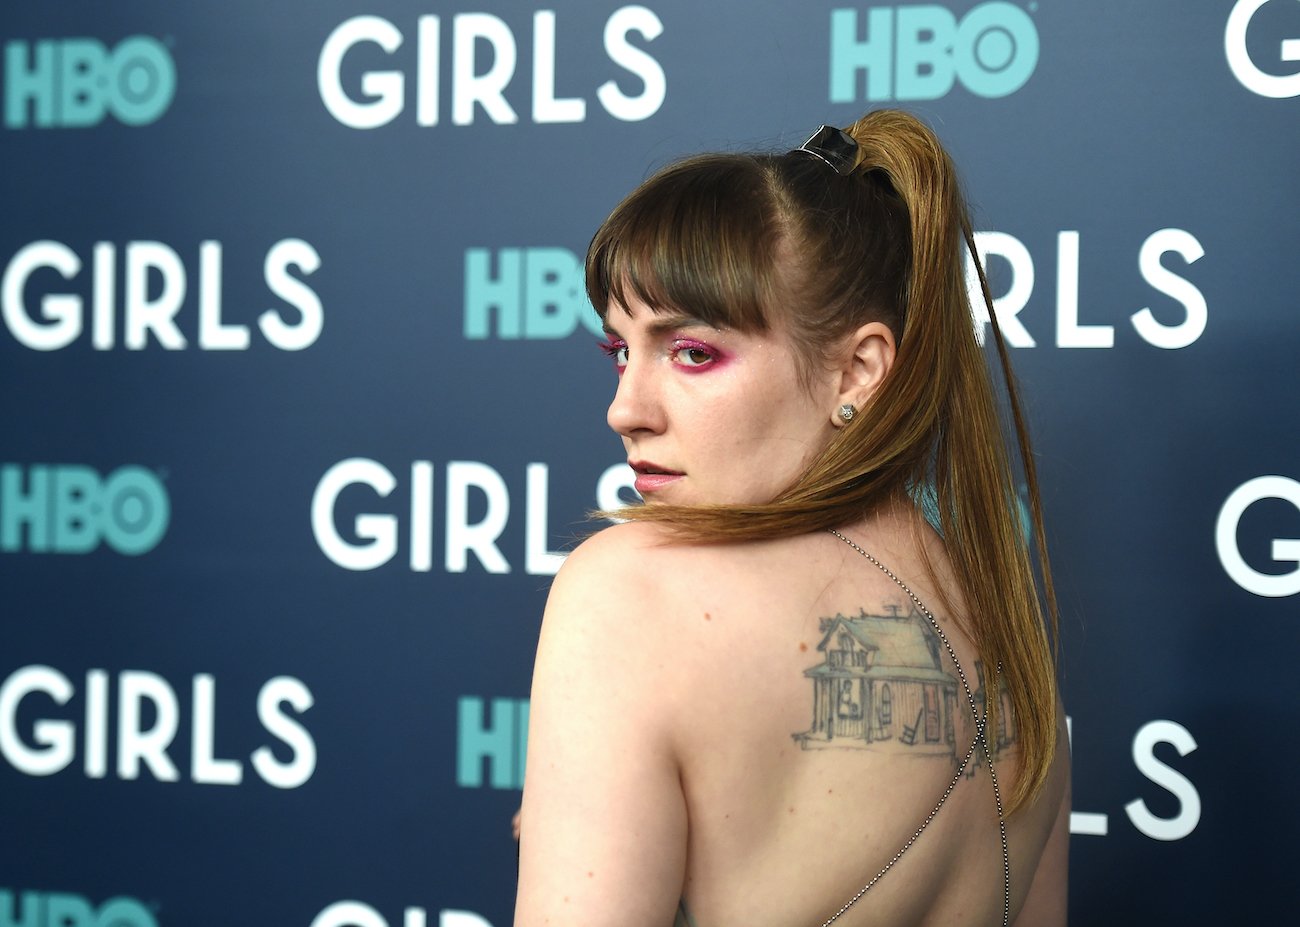 HBO 'Girls' star Lena Dunham glances over her shoulder and poses for the camera